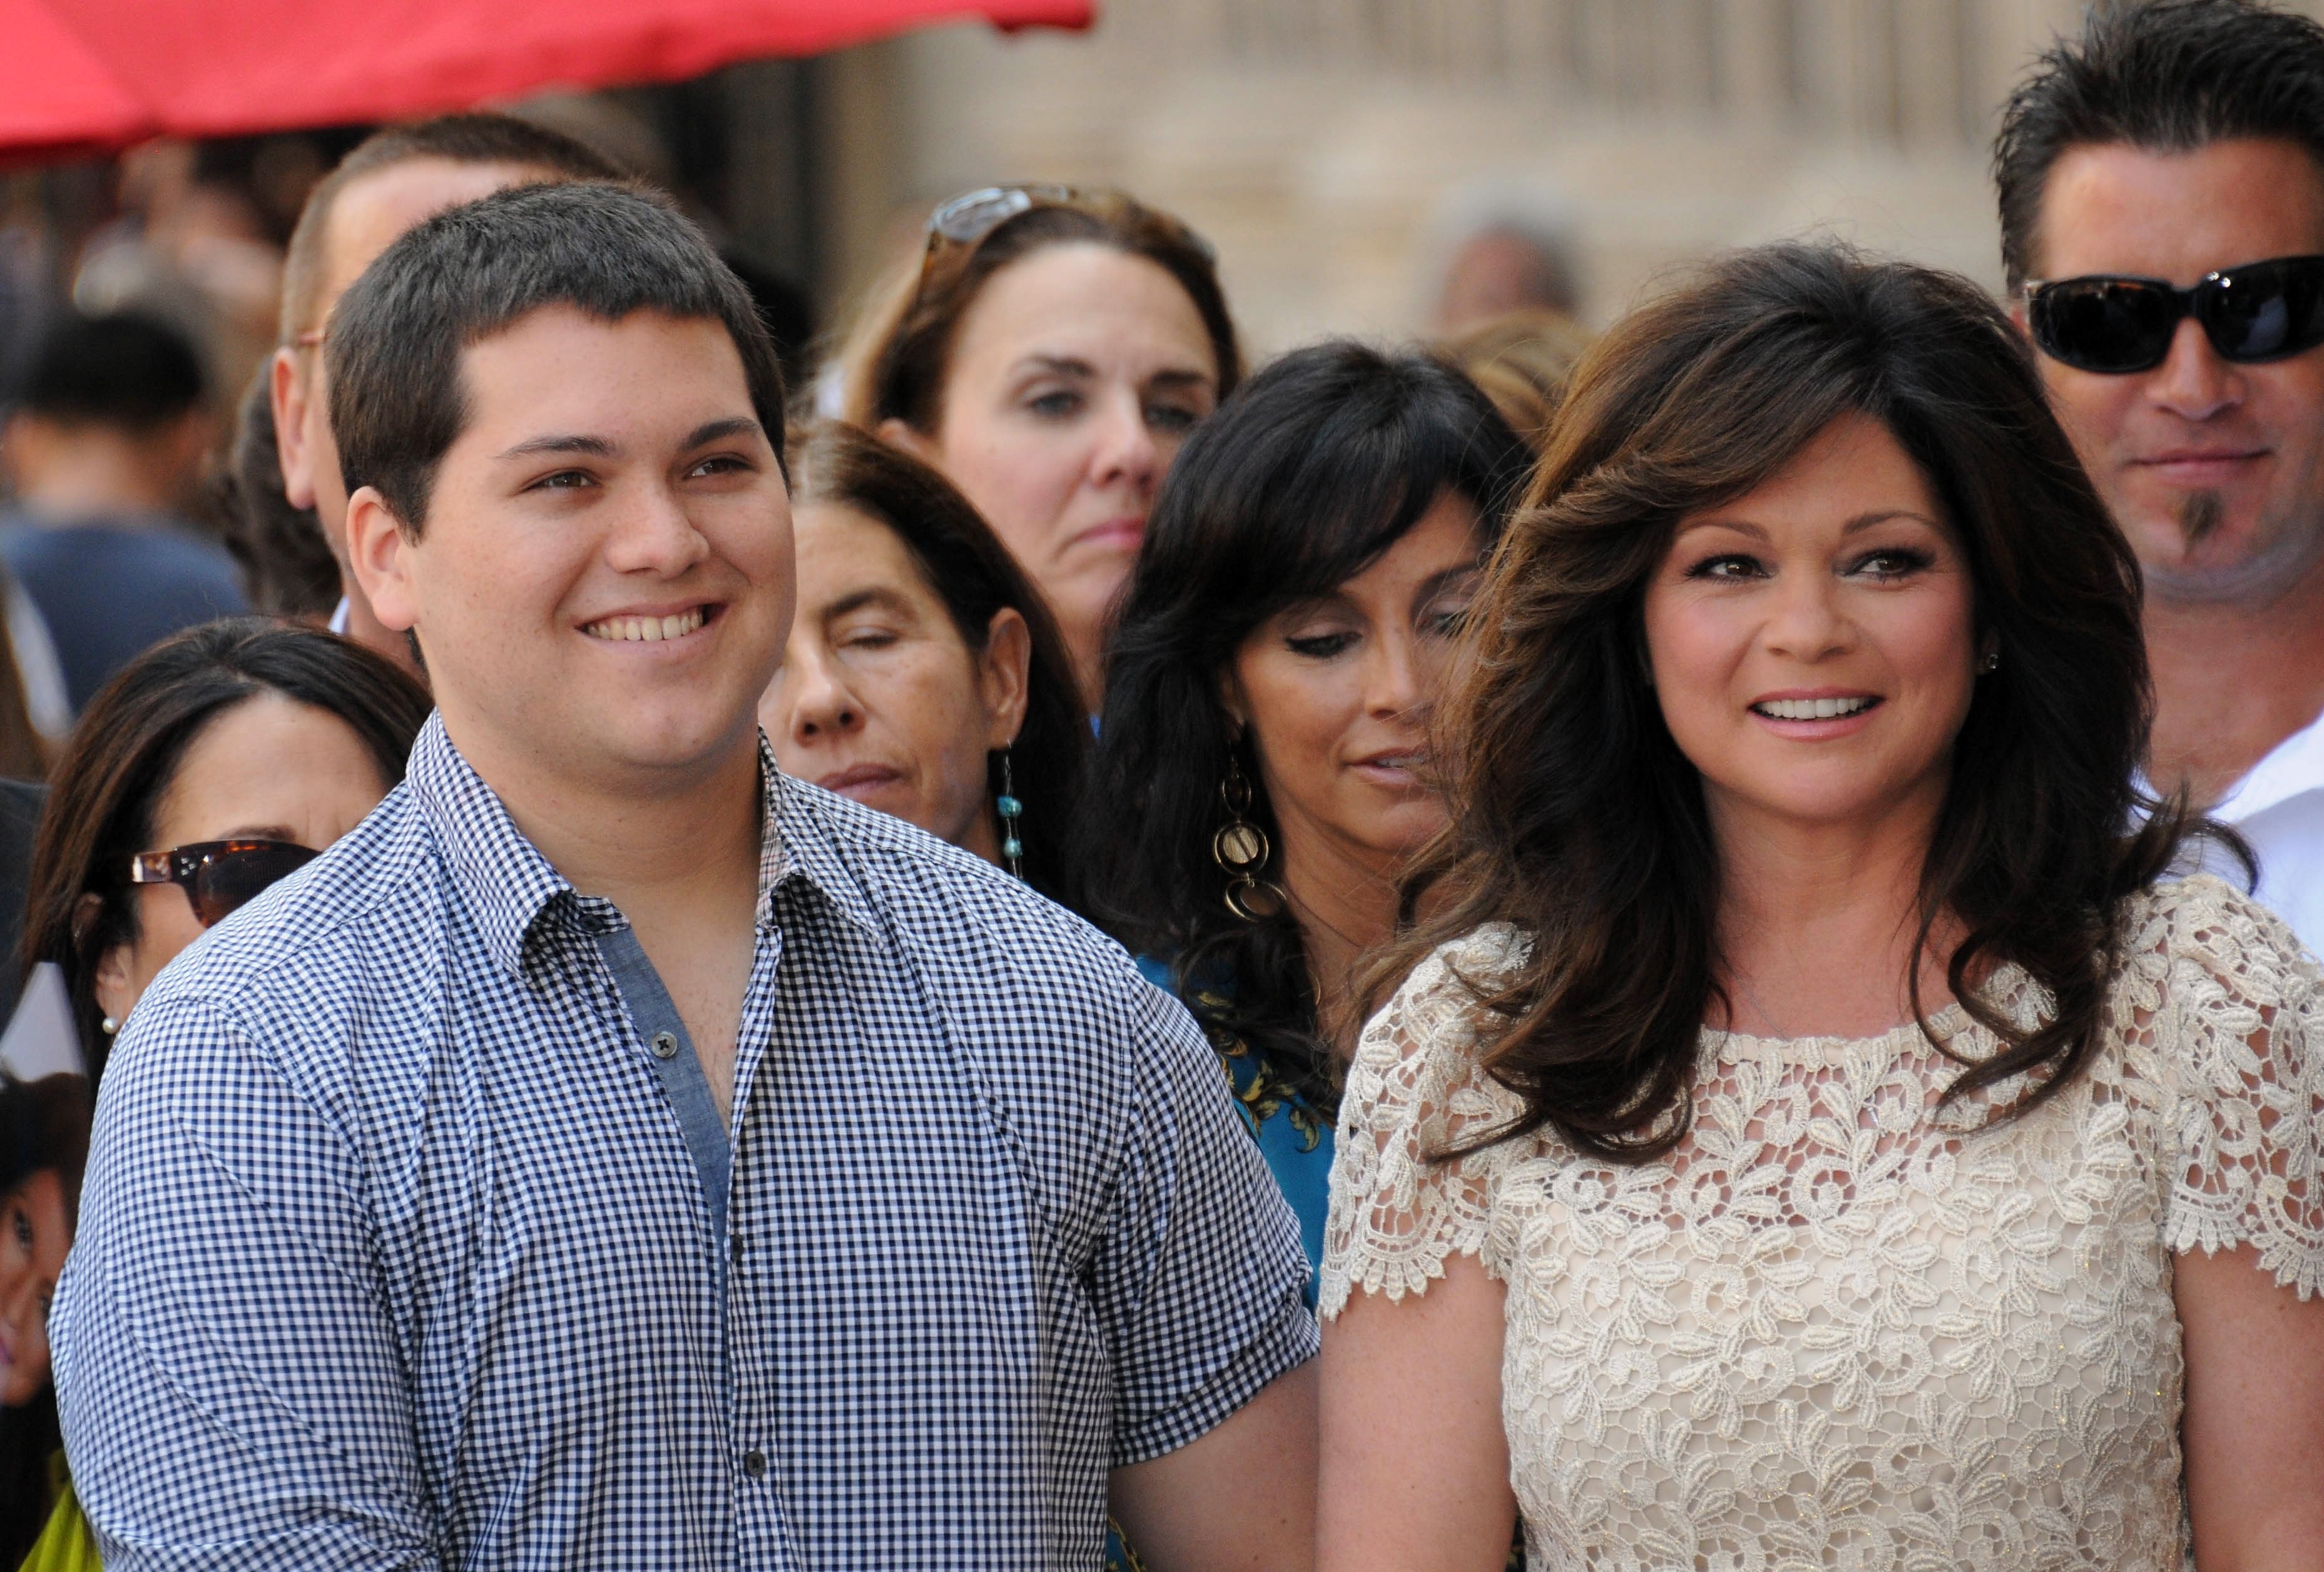 Valerie Bertinelli and son Wolfgang Van Halen as Valerie Bertinelli is honored on the Hollywood Walk Of Fame held on August 22, 2012, in Hollywood, California. | Source: Getty Images